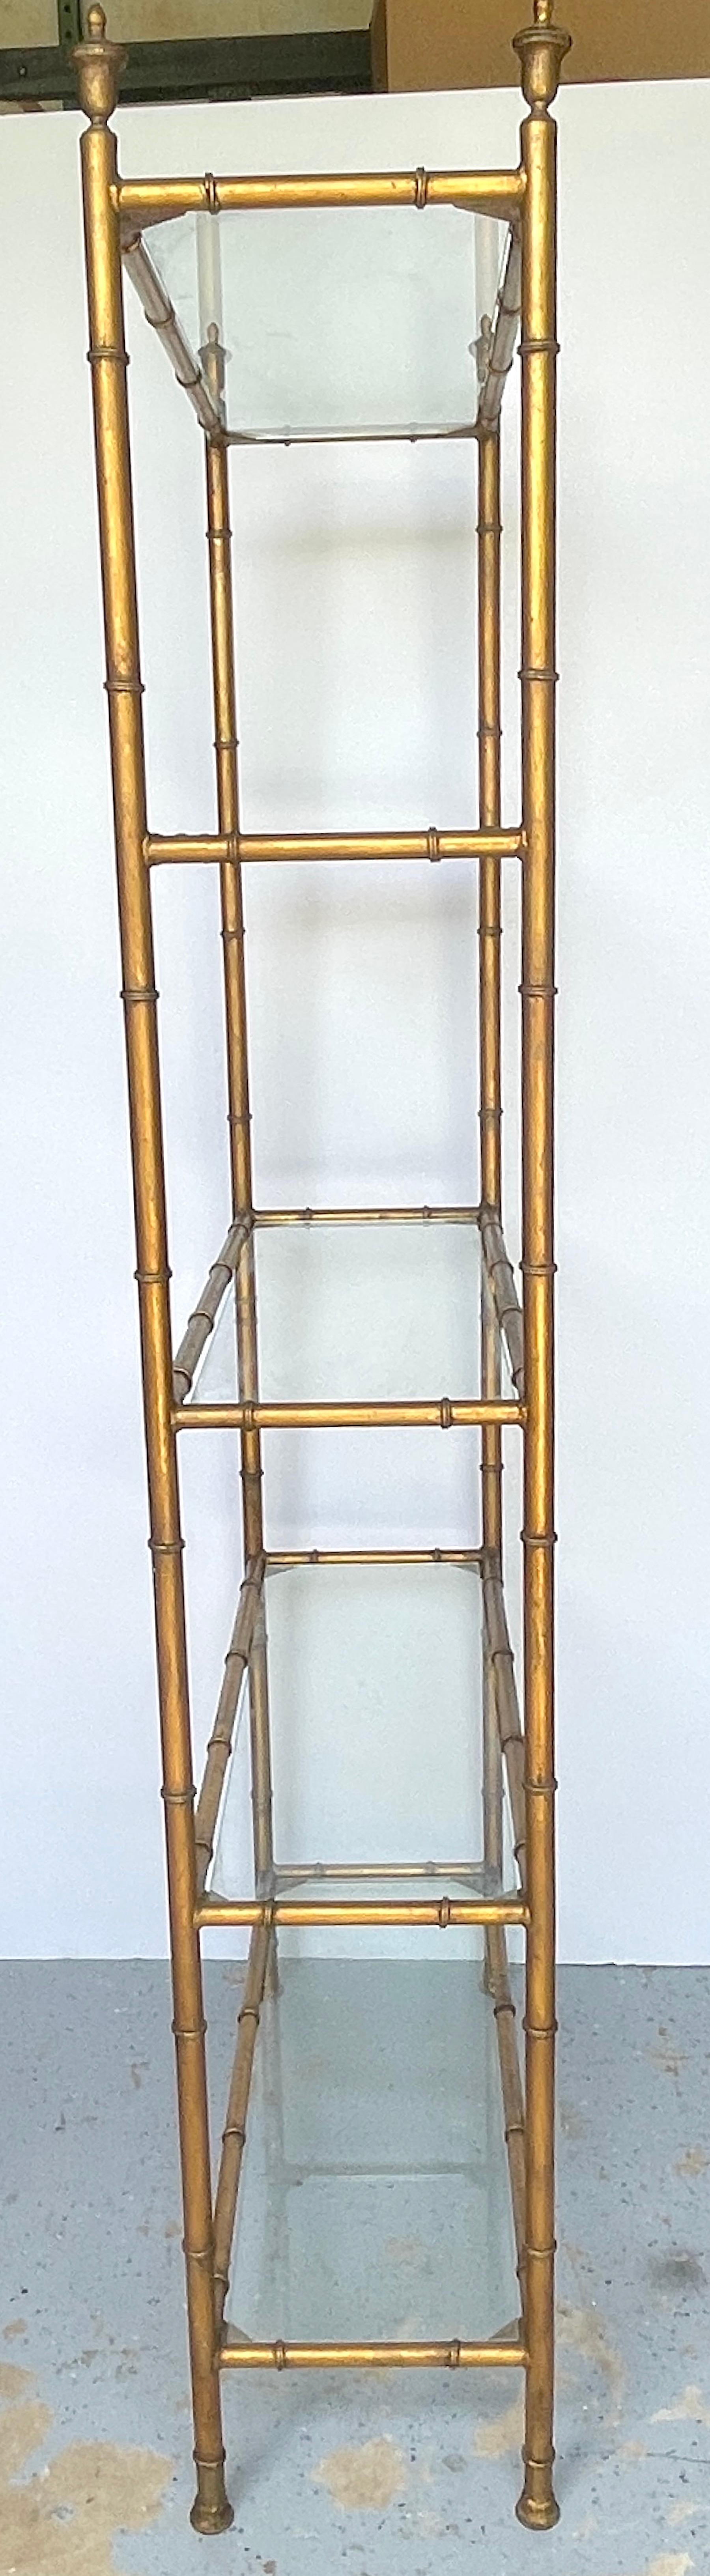 Cast Italian Neoclassical Gilt Faux Bamboo 5-Tier Etagere with Urn Finials, C. 1960s For Sale